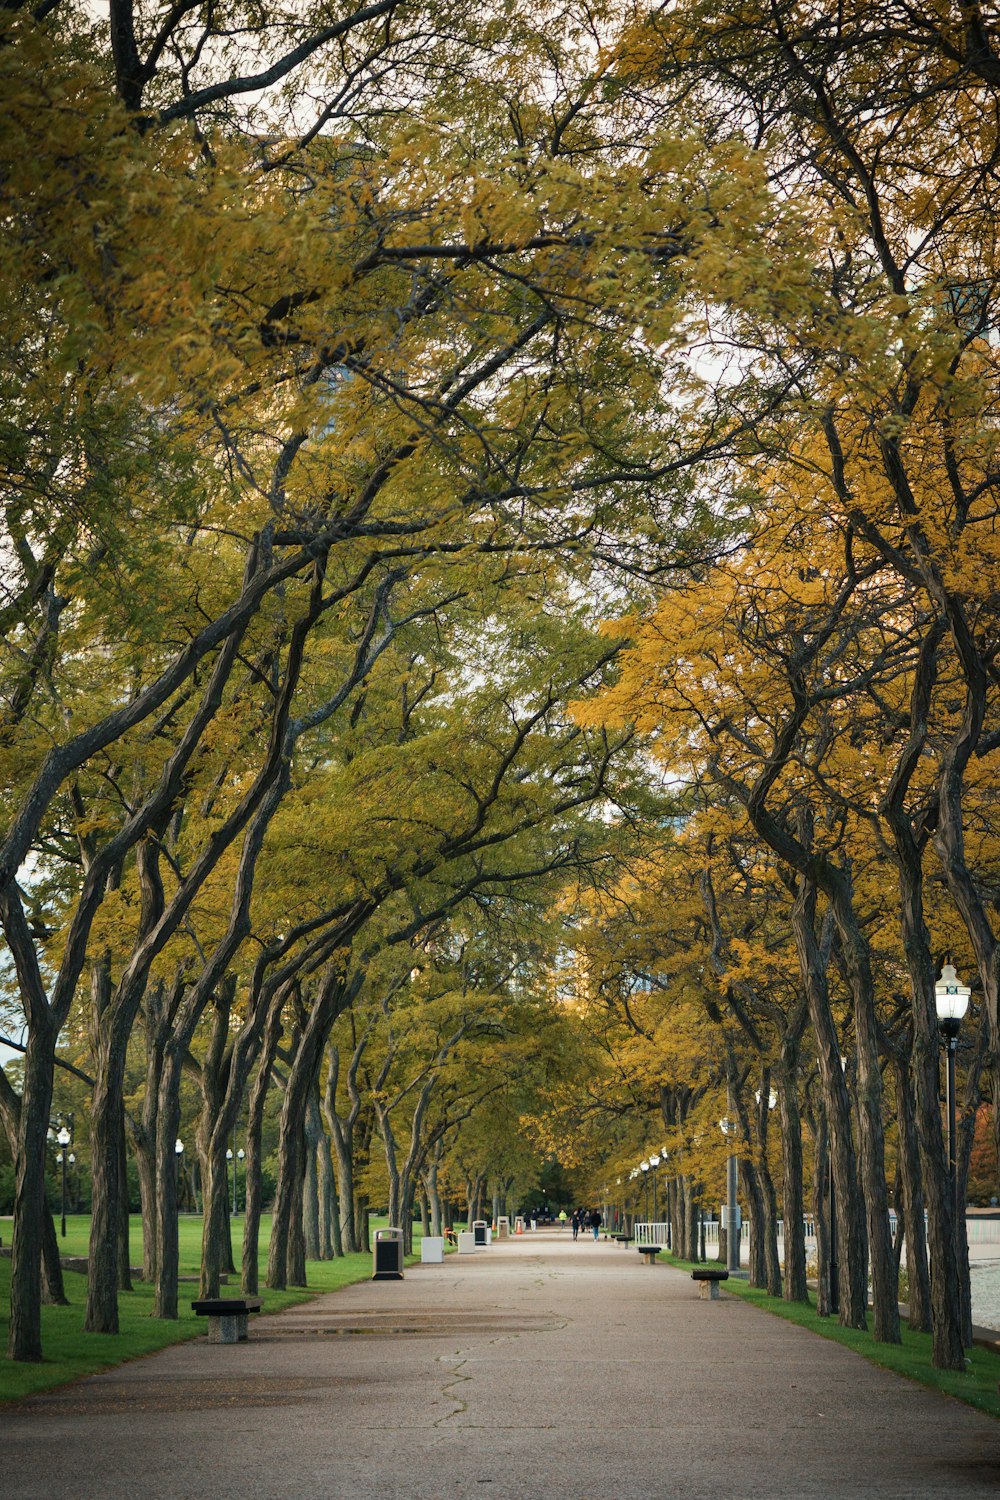 a tree lined street lined with benches and trees